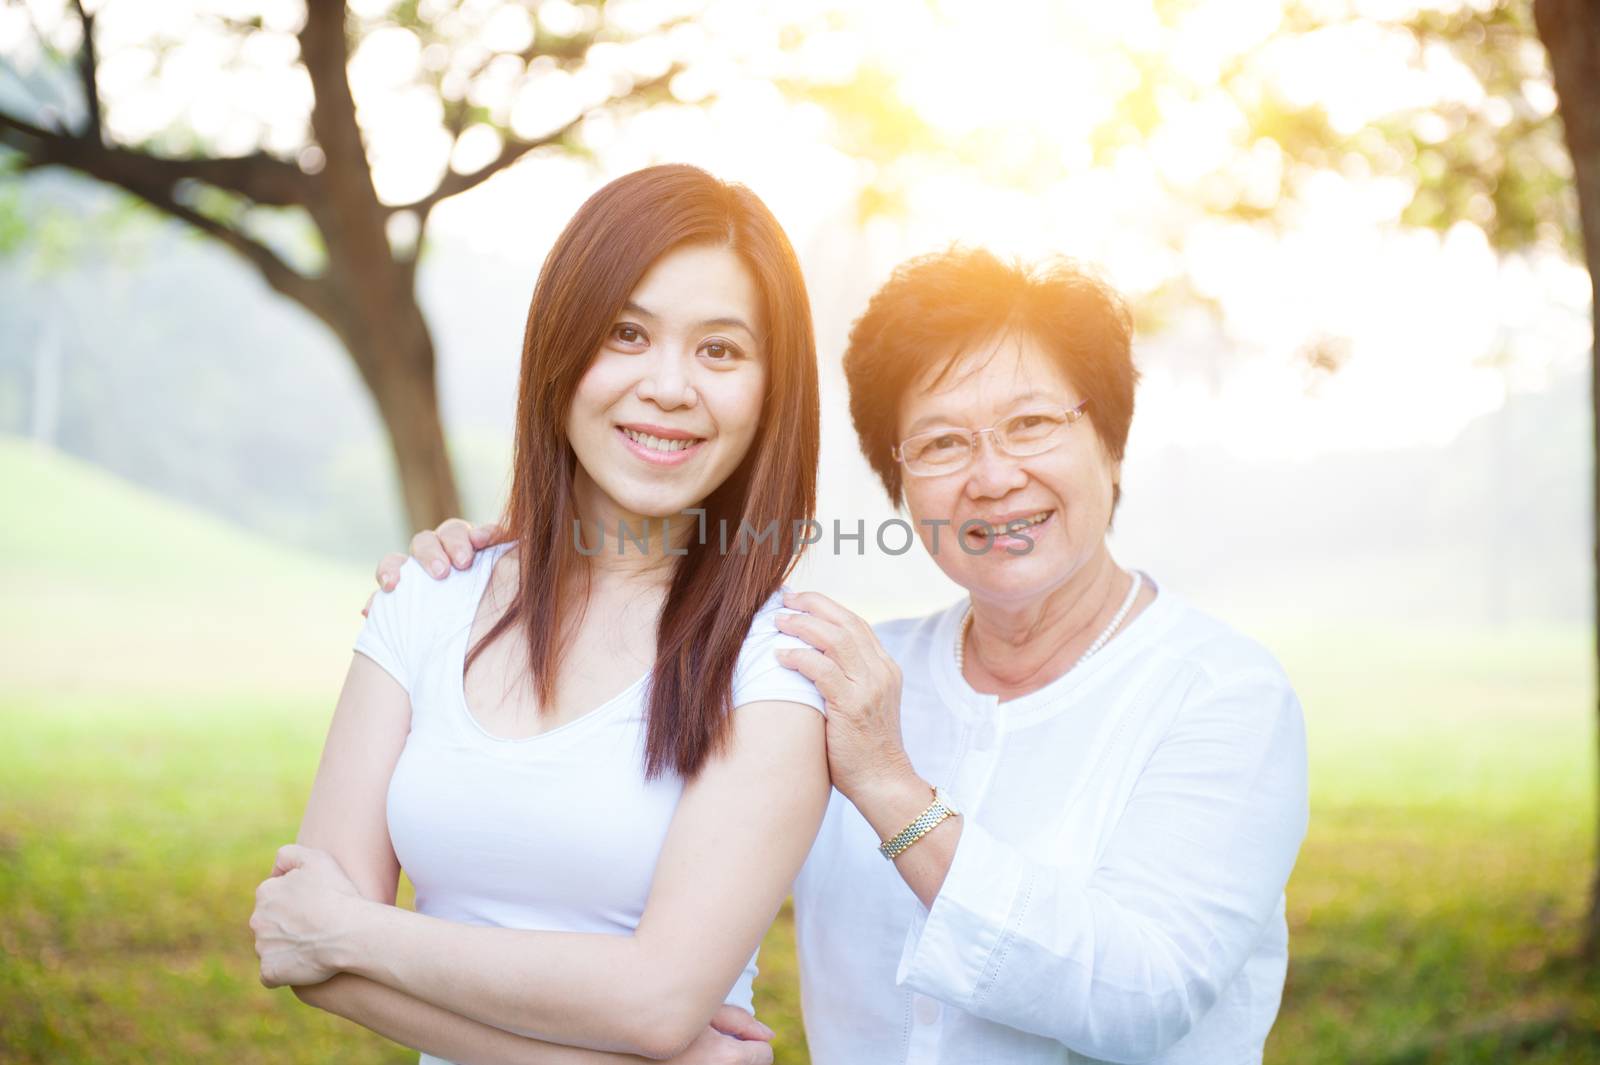 Portrait of beautiful Asian elderly mother and daughter, senior adult woman and grown child. Outdoors family at nature park with beautiful sun flare.